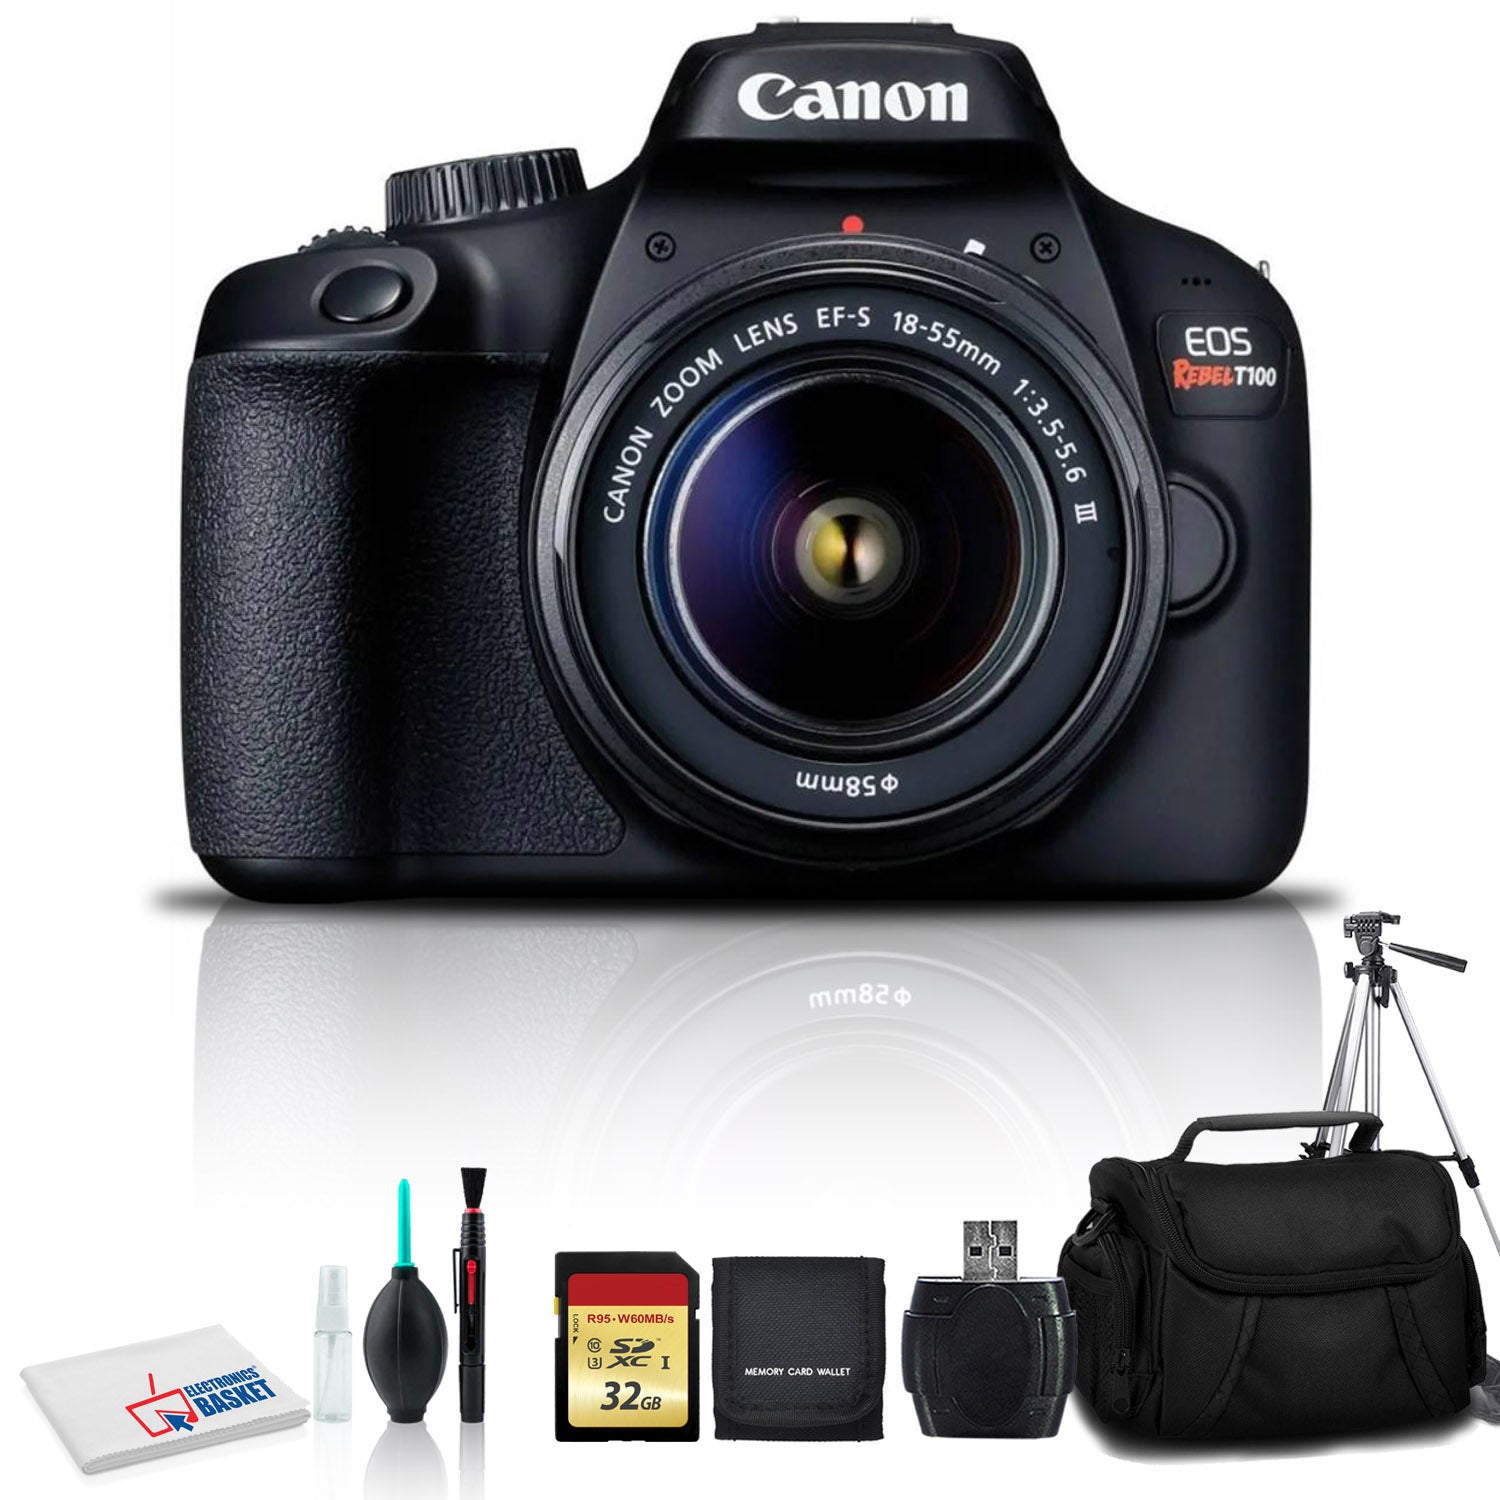 Canon EOS Rebel T100 DSLR Camera with 18-55mm Lens, Cleaning Kit, 32GB Memory Kit, Carry Case, and Full Size Tripod